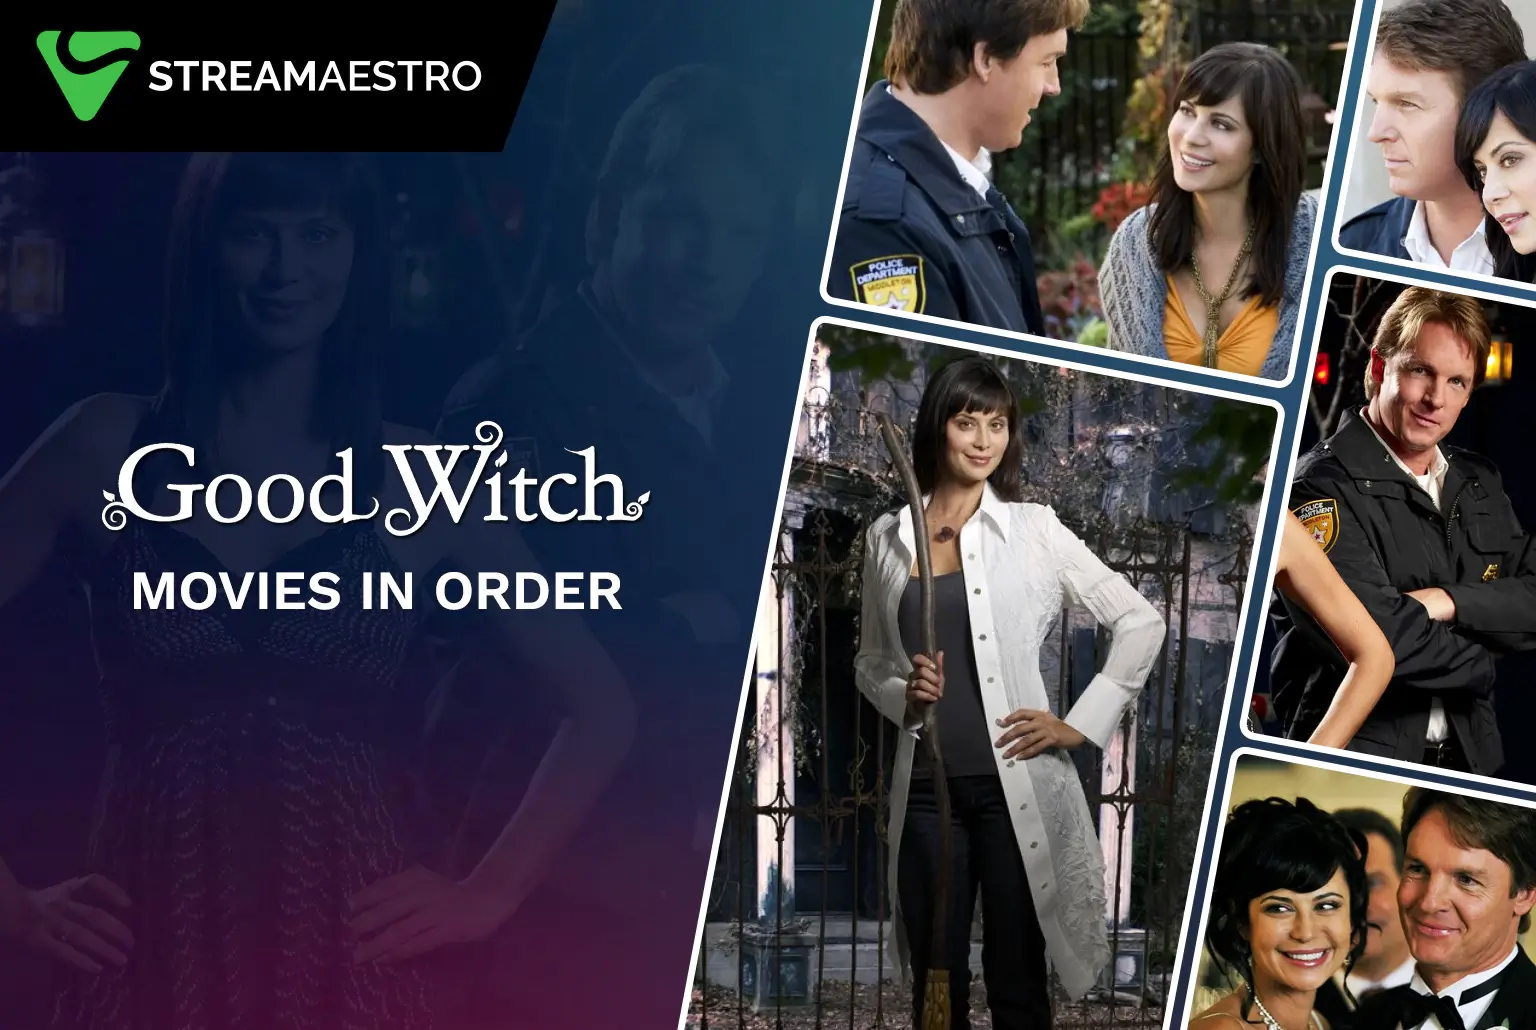 The Good Witch Movies in Order